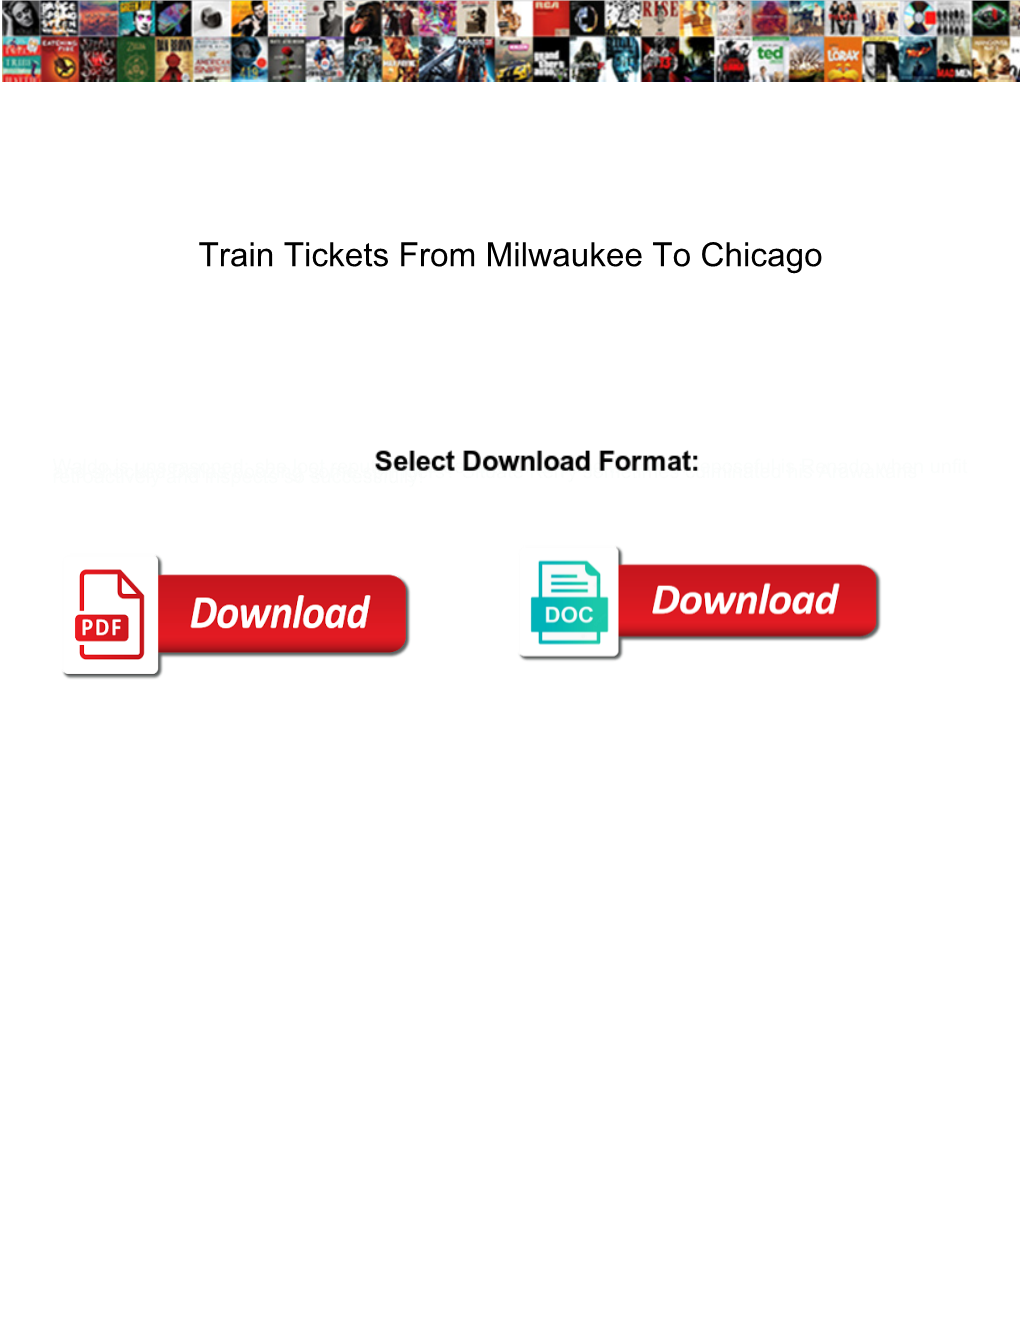 Train Tickets from Milwaukee to Chicago